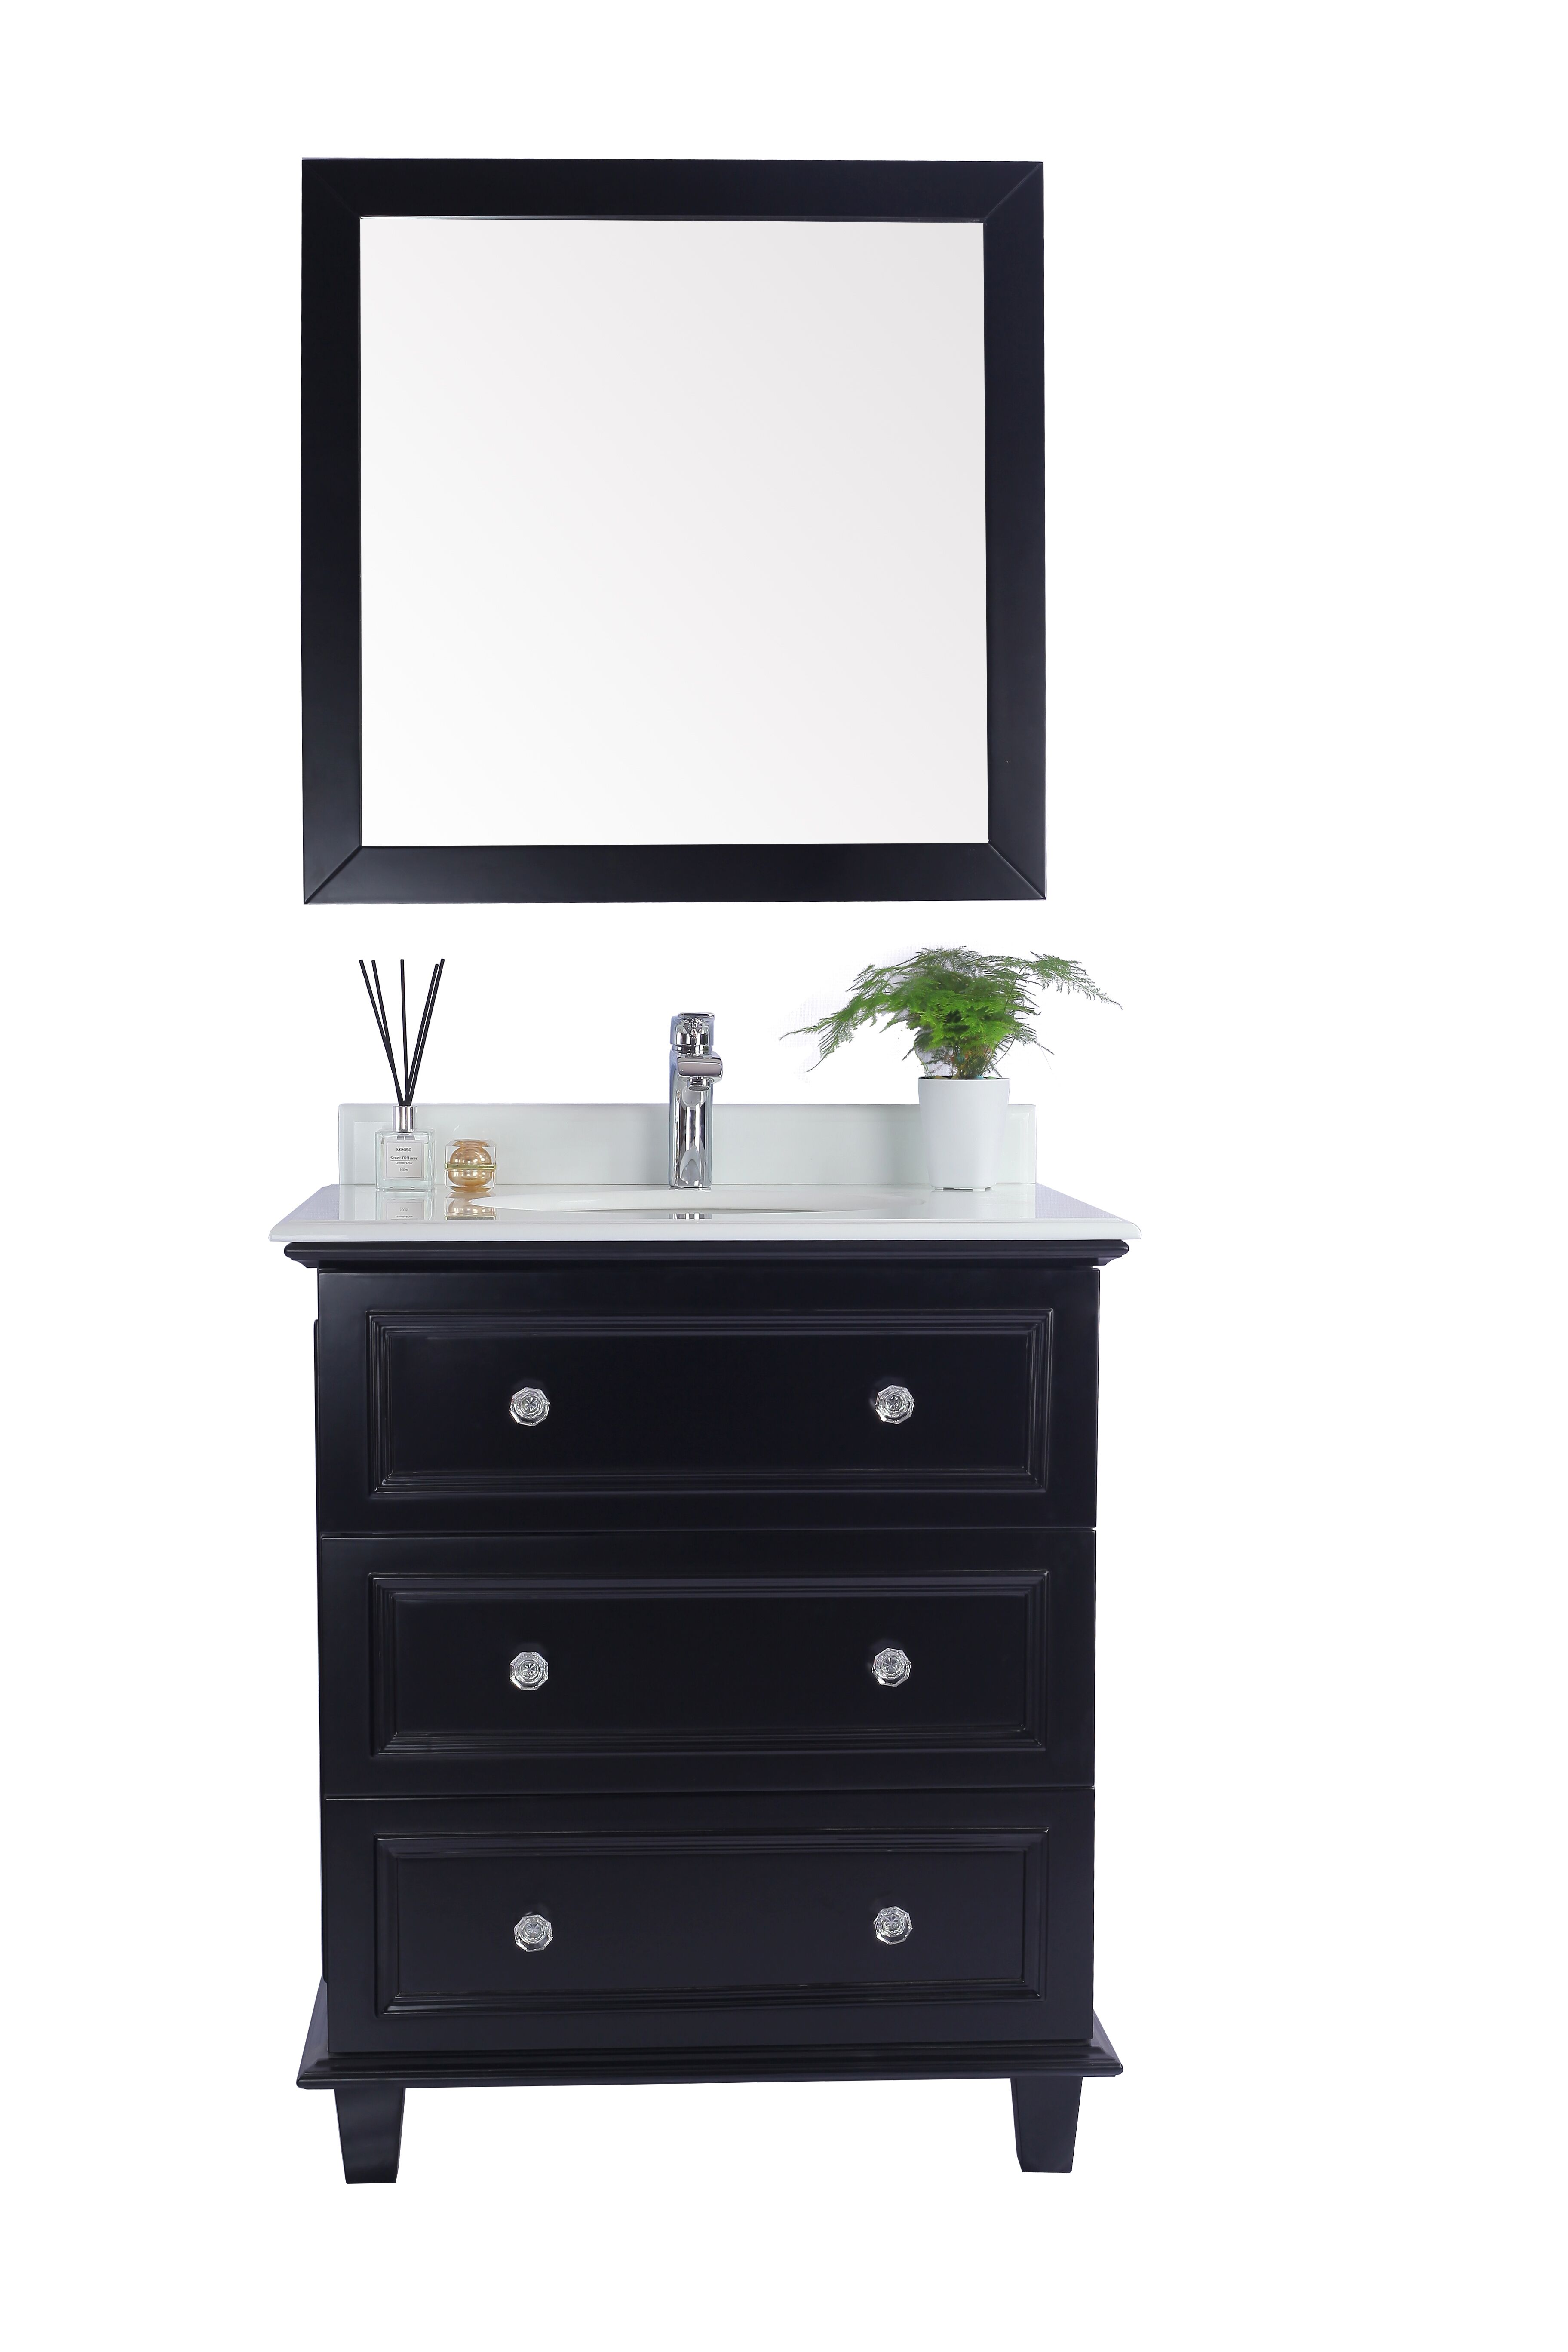 30" Single Bathroom Vanity Cabinet with Top and Color Options